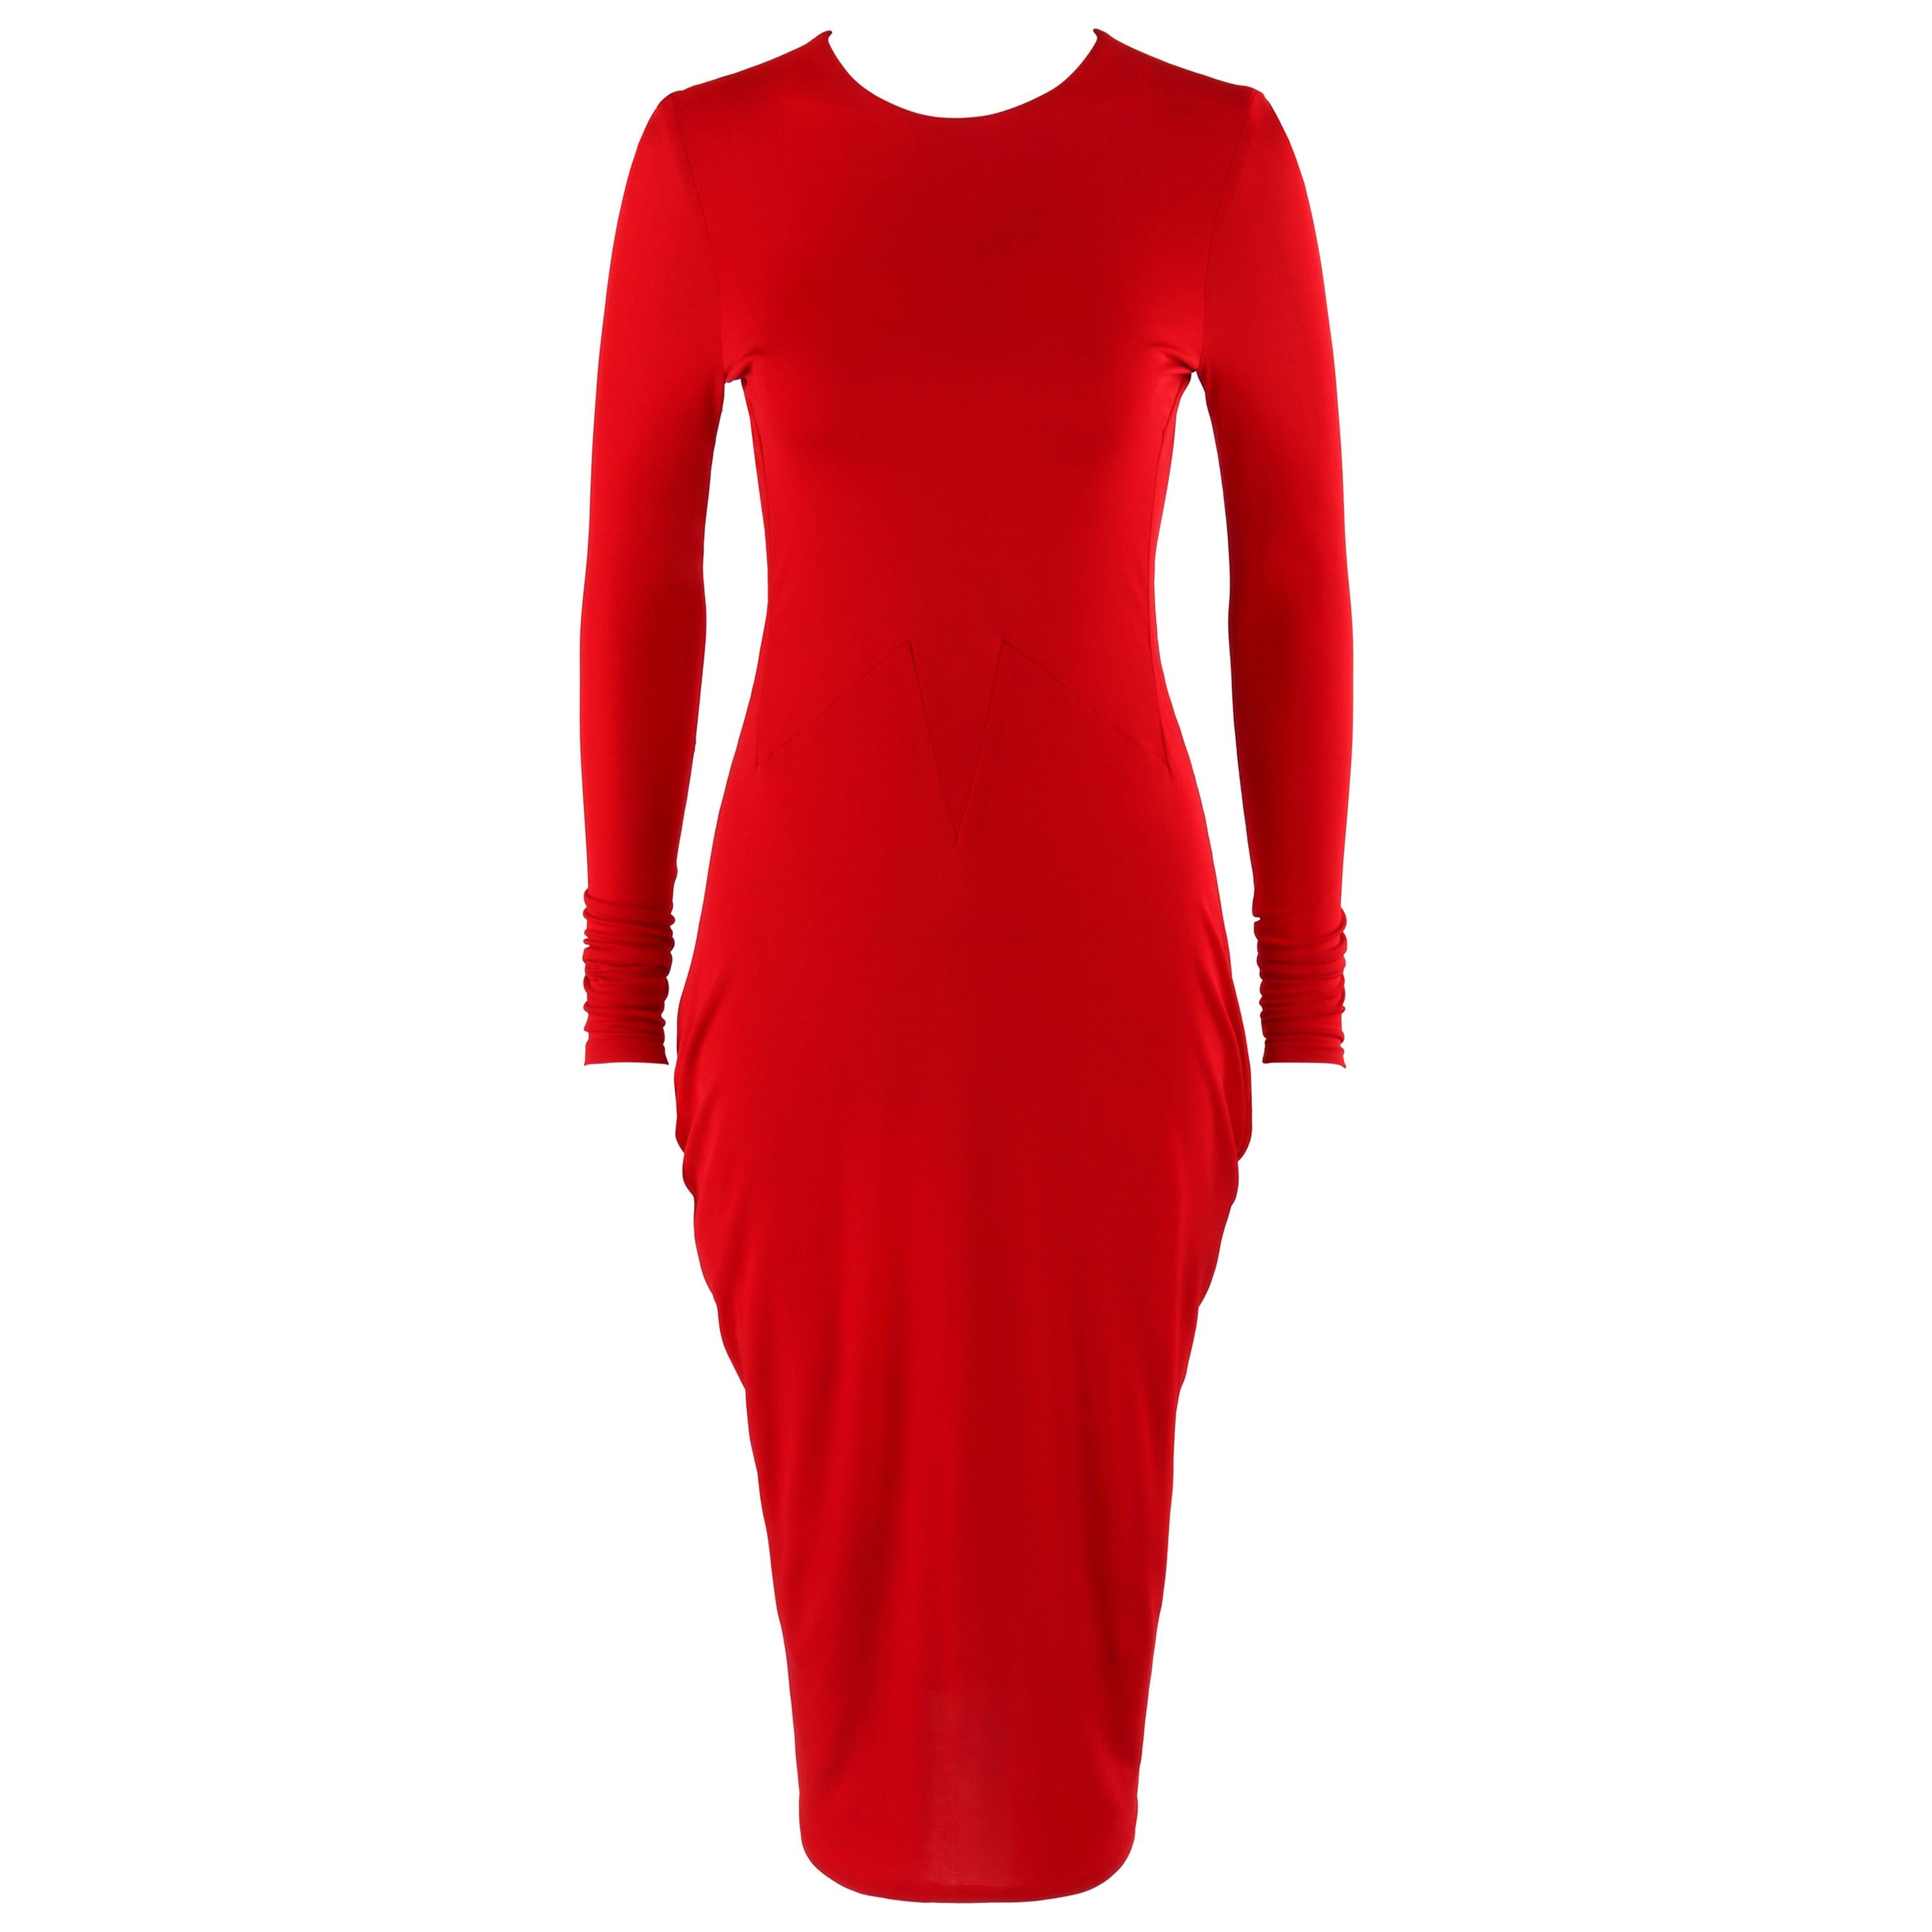 ALEXANDER McQUEEN Resort 2011 Red Long Sleeve Draped Ruched Detail Bodycon Dress